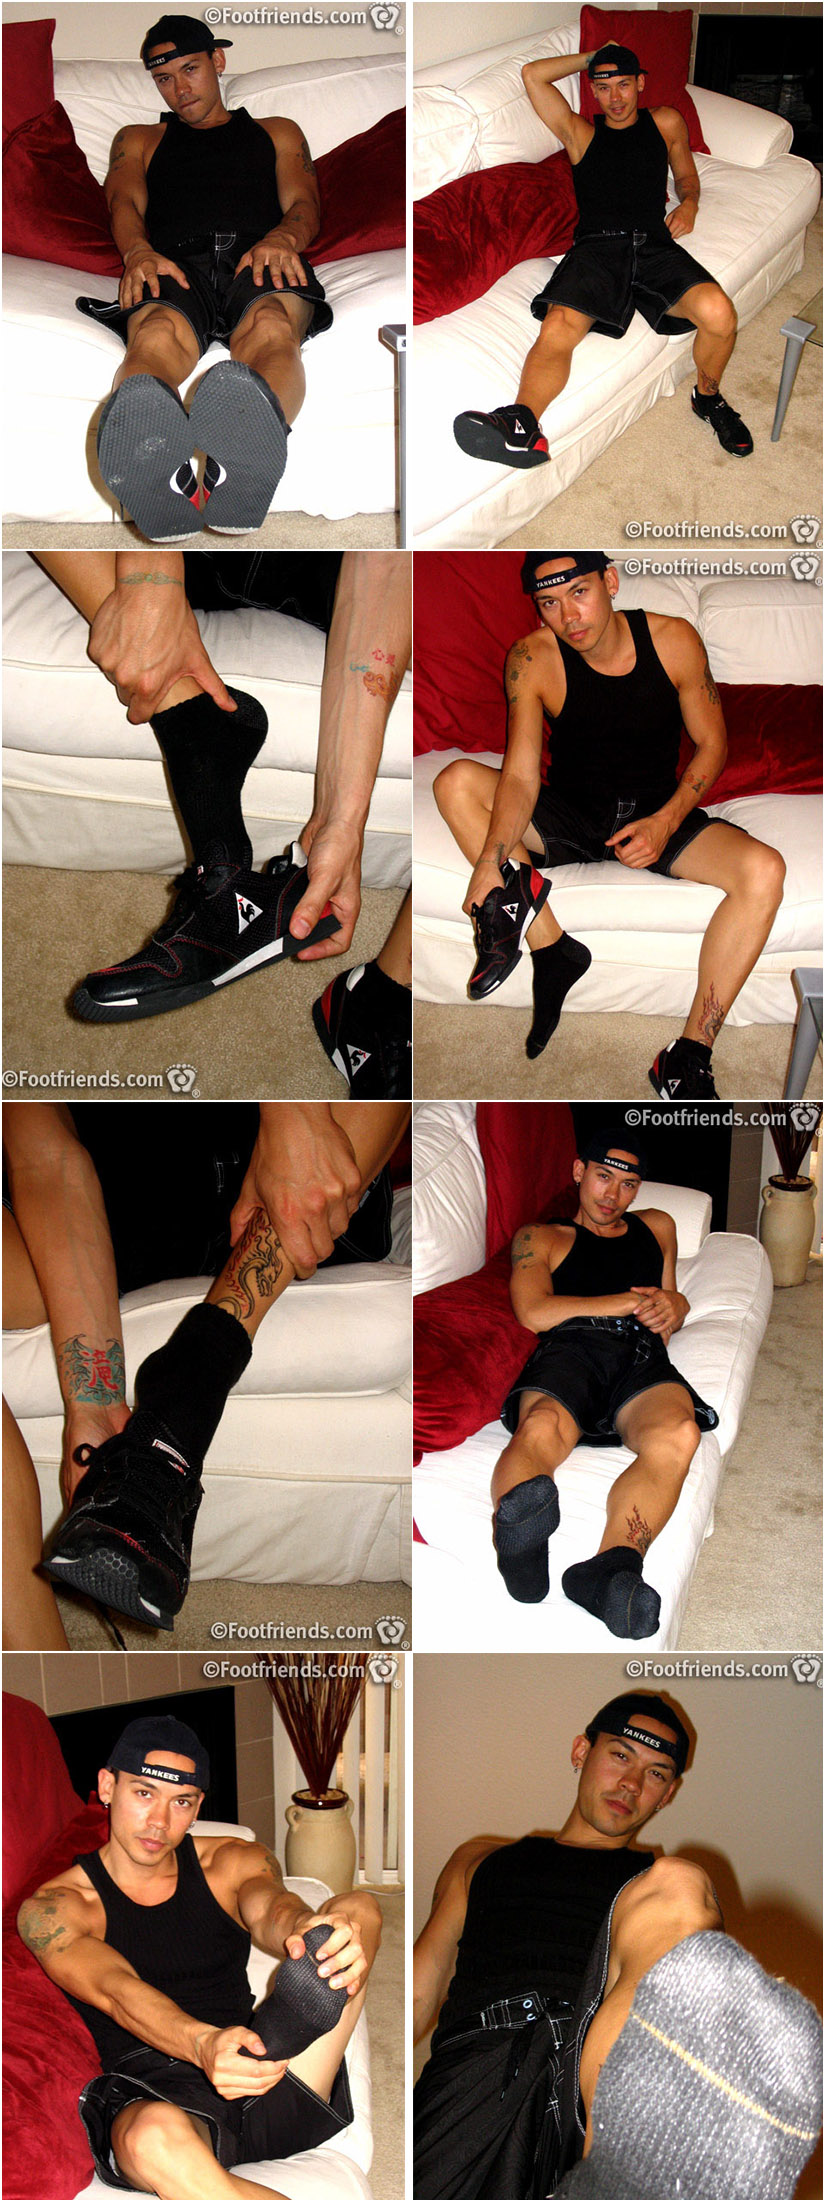 Slim amateur guy takes off his shoes to reveal sweaty socks